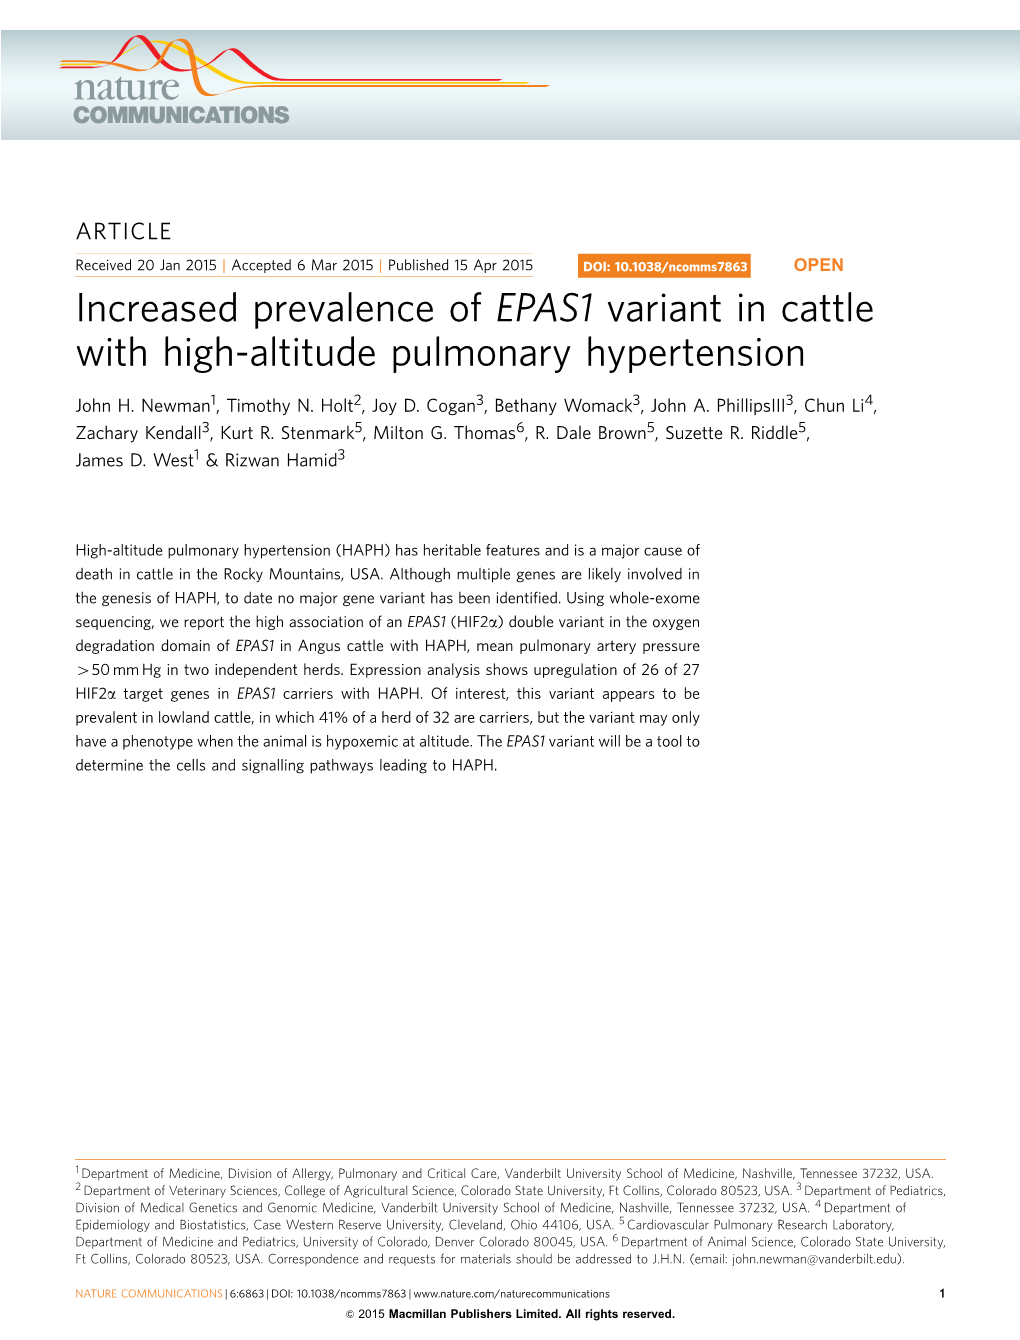 Increased Prevalence of EPAS1 Variant in Cattle with High-Altitude Pulmonary Hypertension